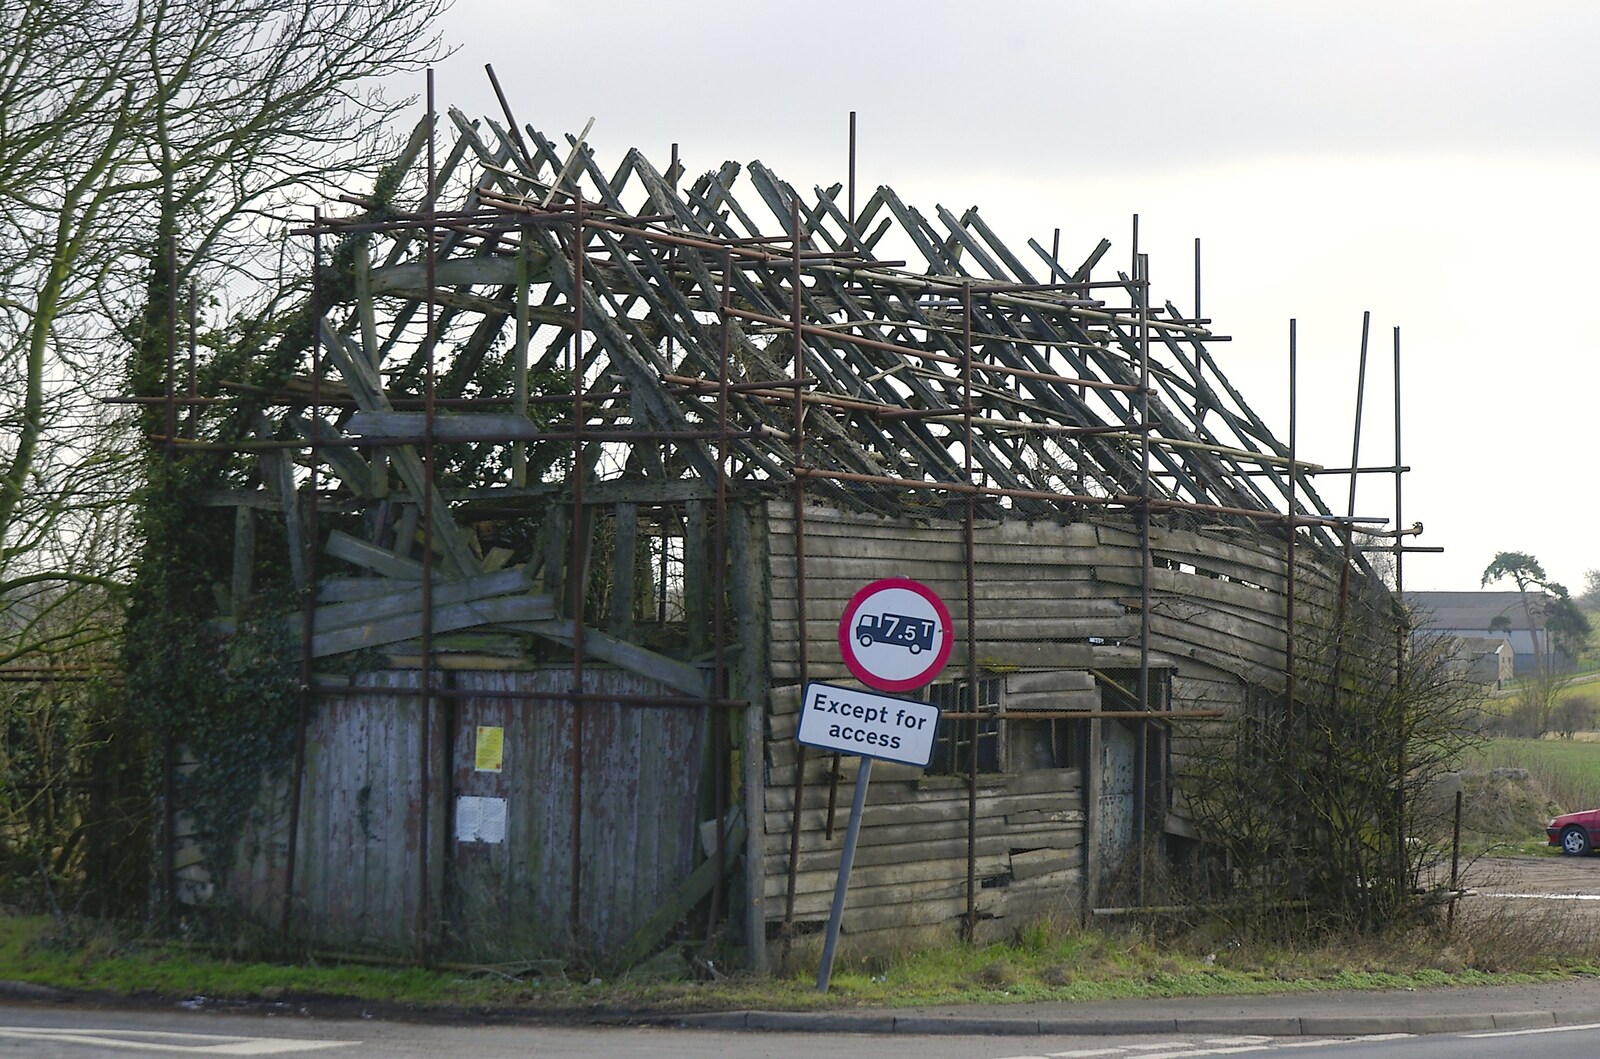 The derelict timber frame in Stoke Ash from Wrecked Cars, A Night Out and Stick Game in the Cherry Tree, Cambridge and Yaxley, Suffolk- 24th February 2006